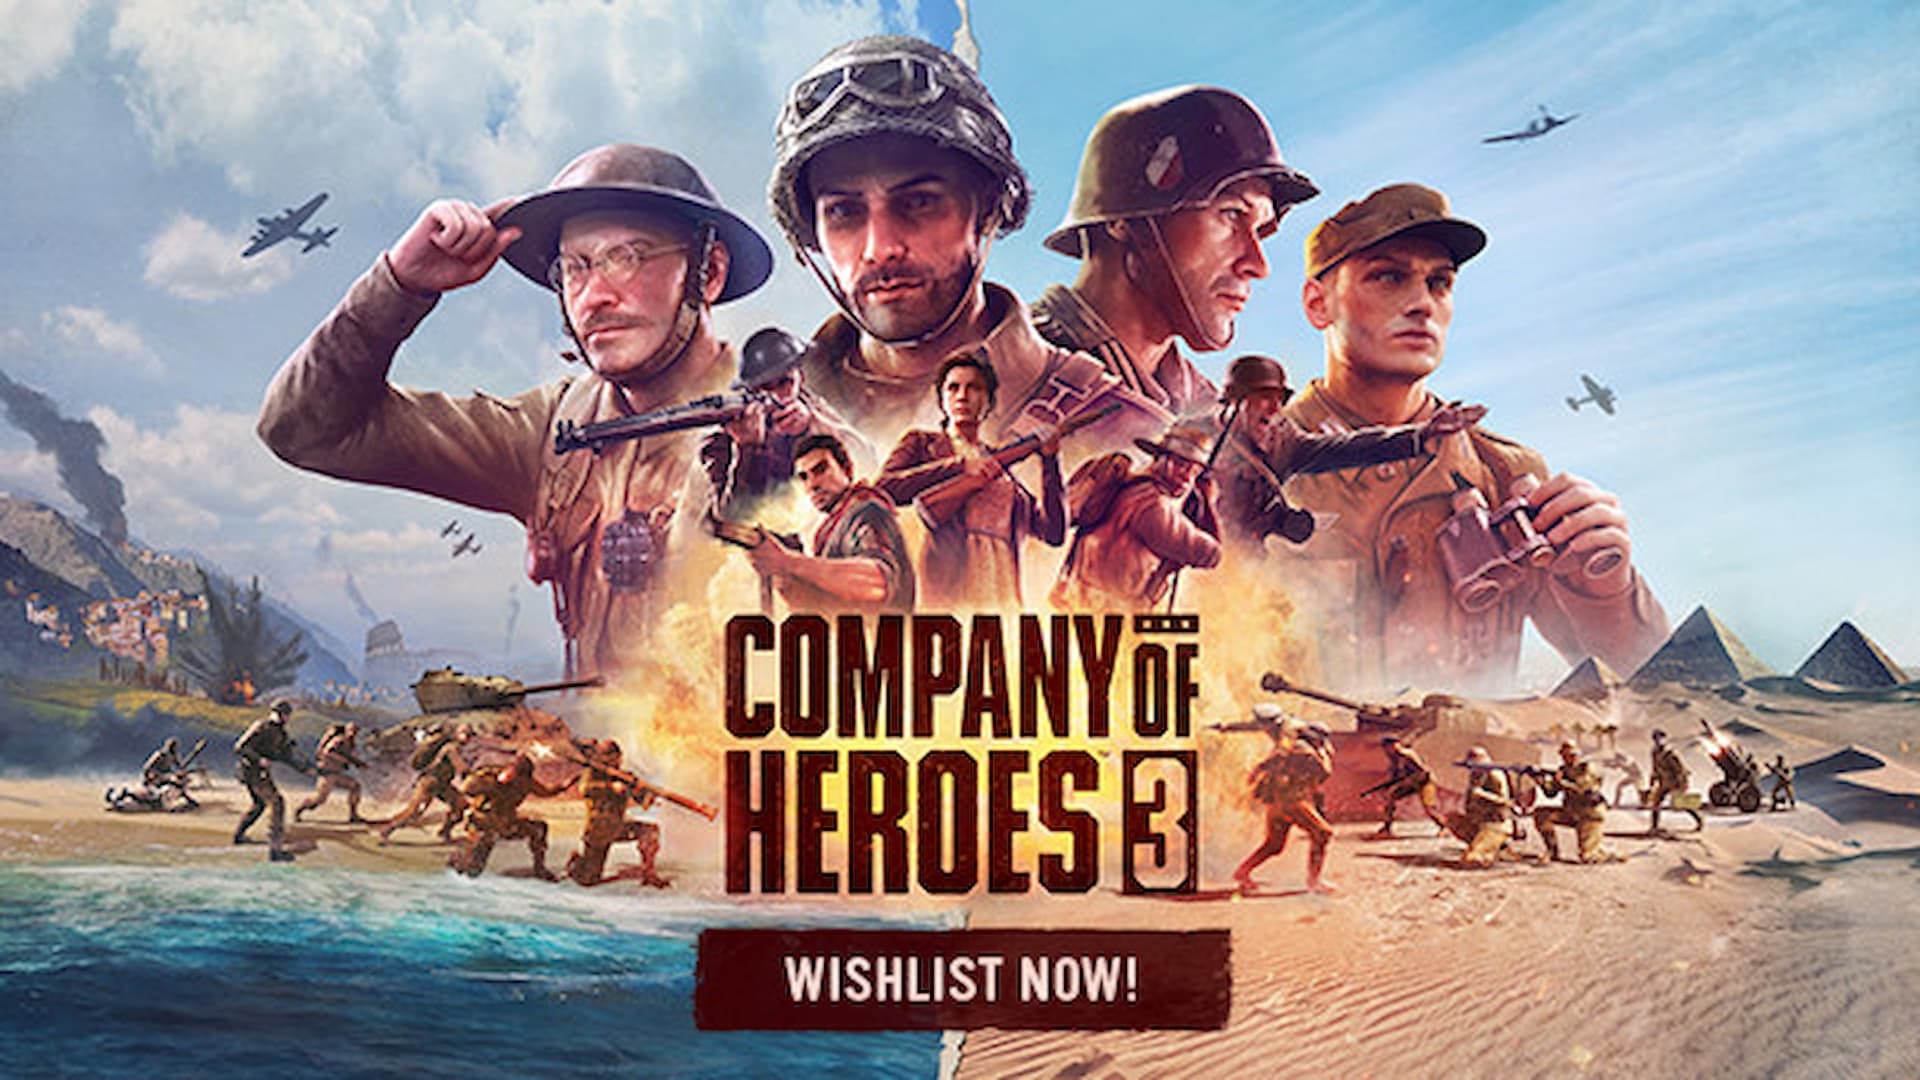 Company of Heroes 3 Release Date Announced